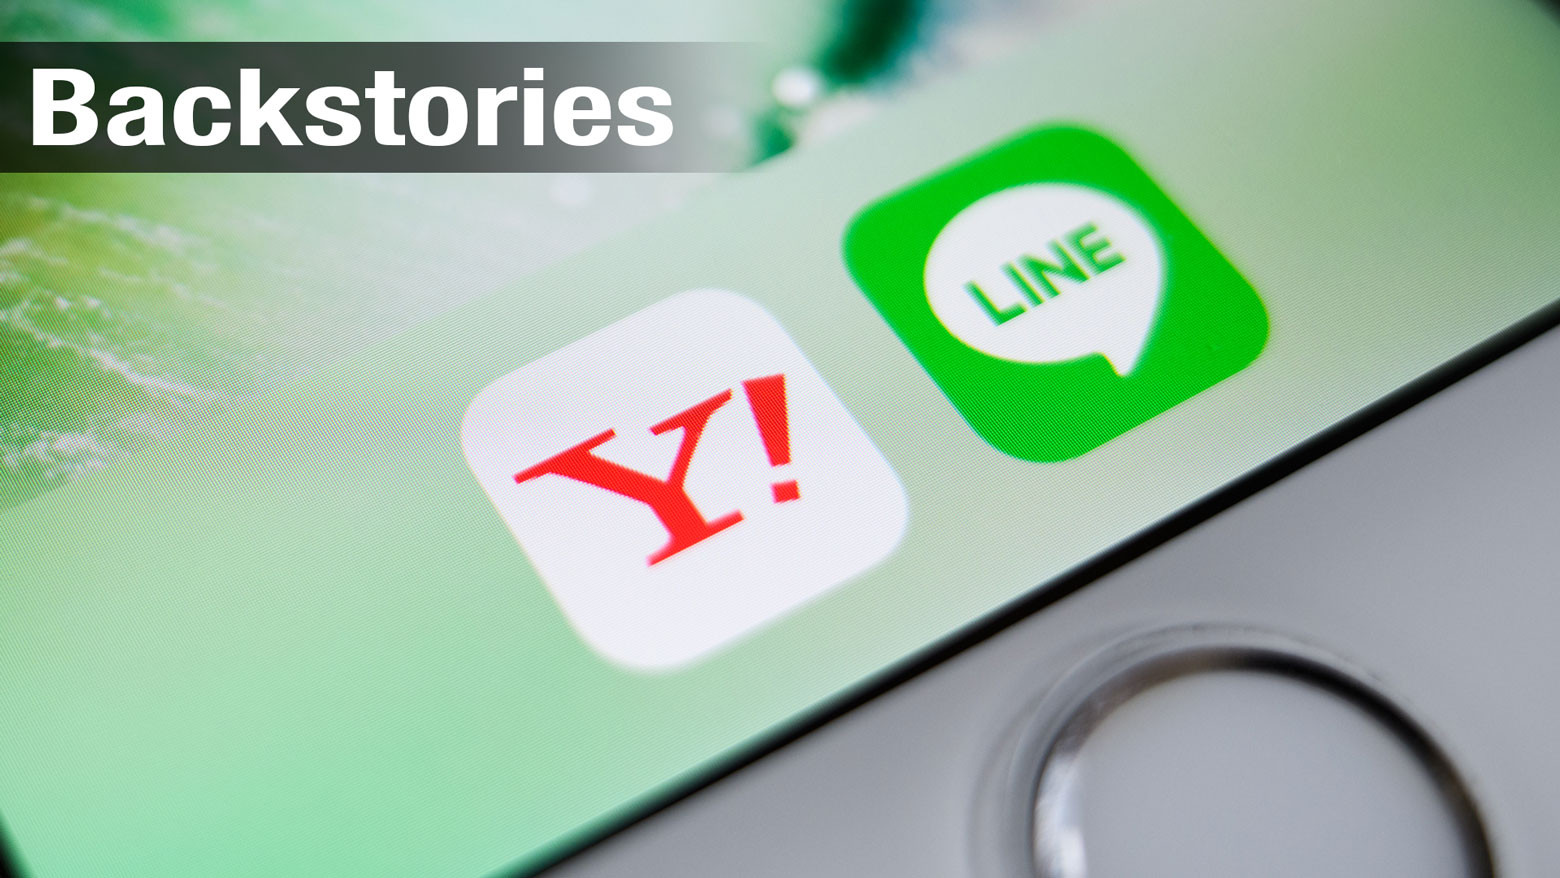 Can the Yahoo Japan-Line merger upend the global tech landscape?